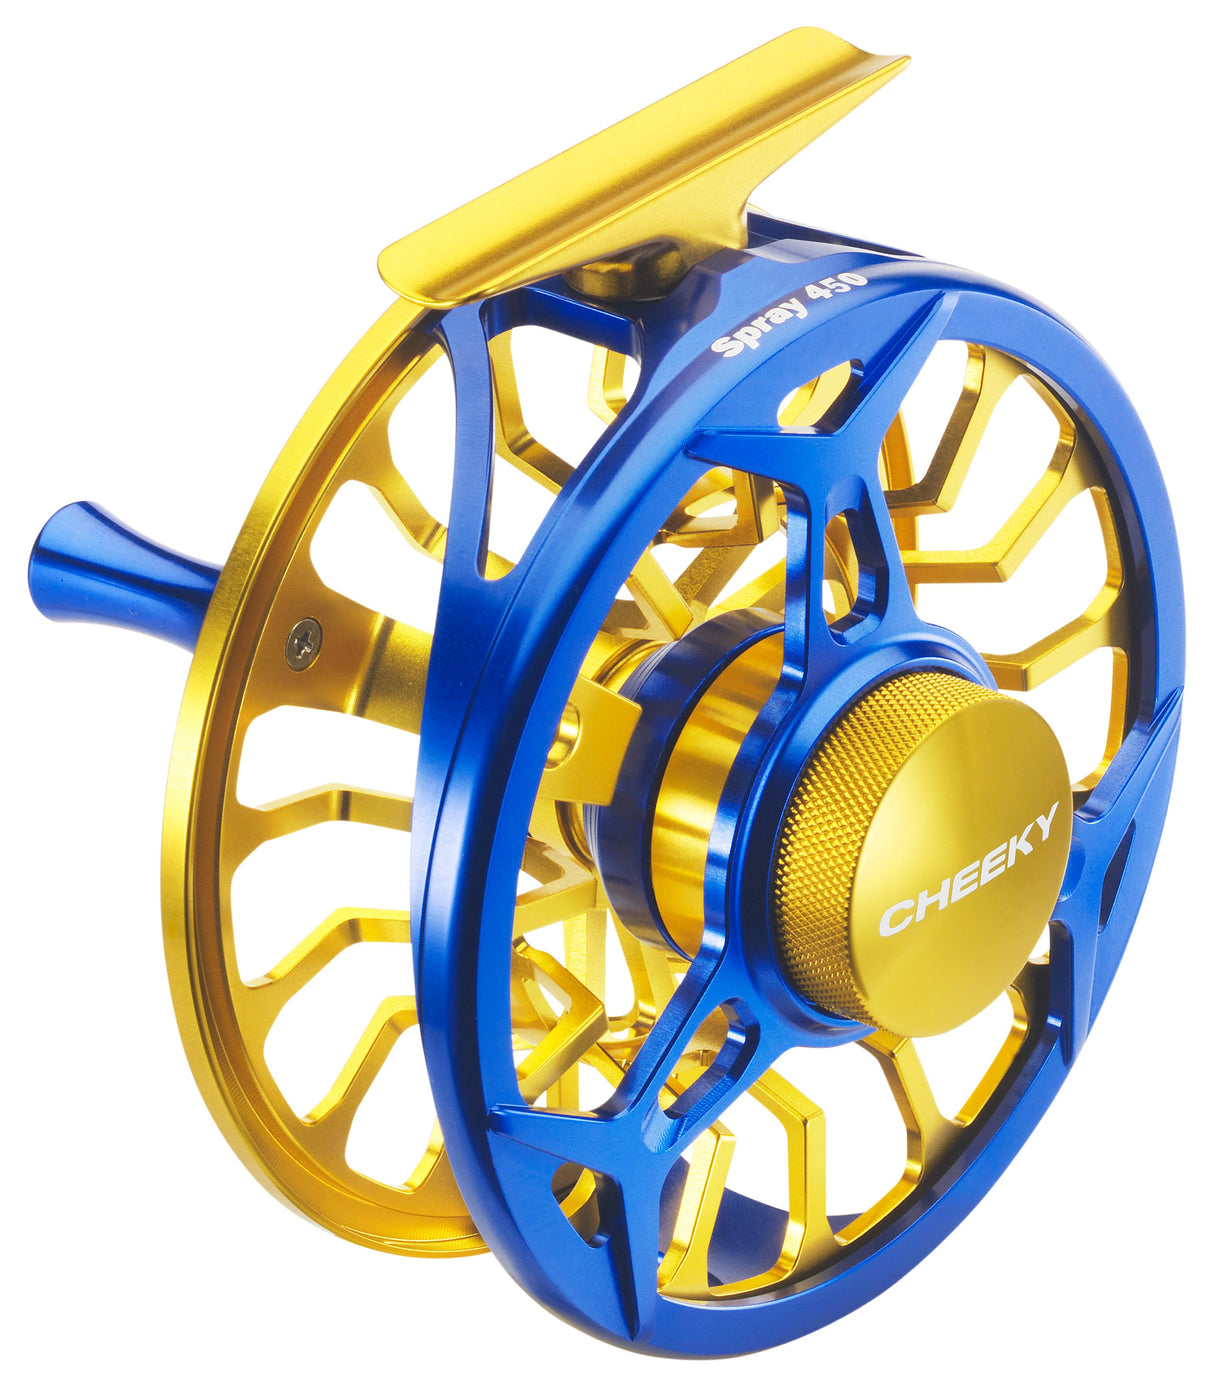 CHEEKY SPRAY 450 FLY REEL ELECTRIC BLUE/GOLD